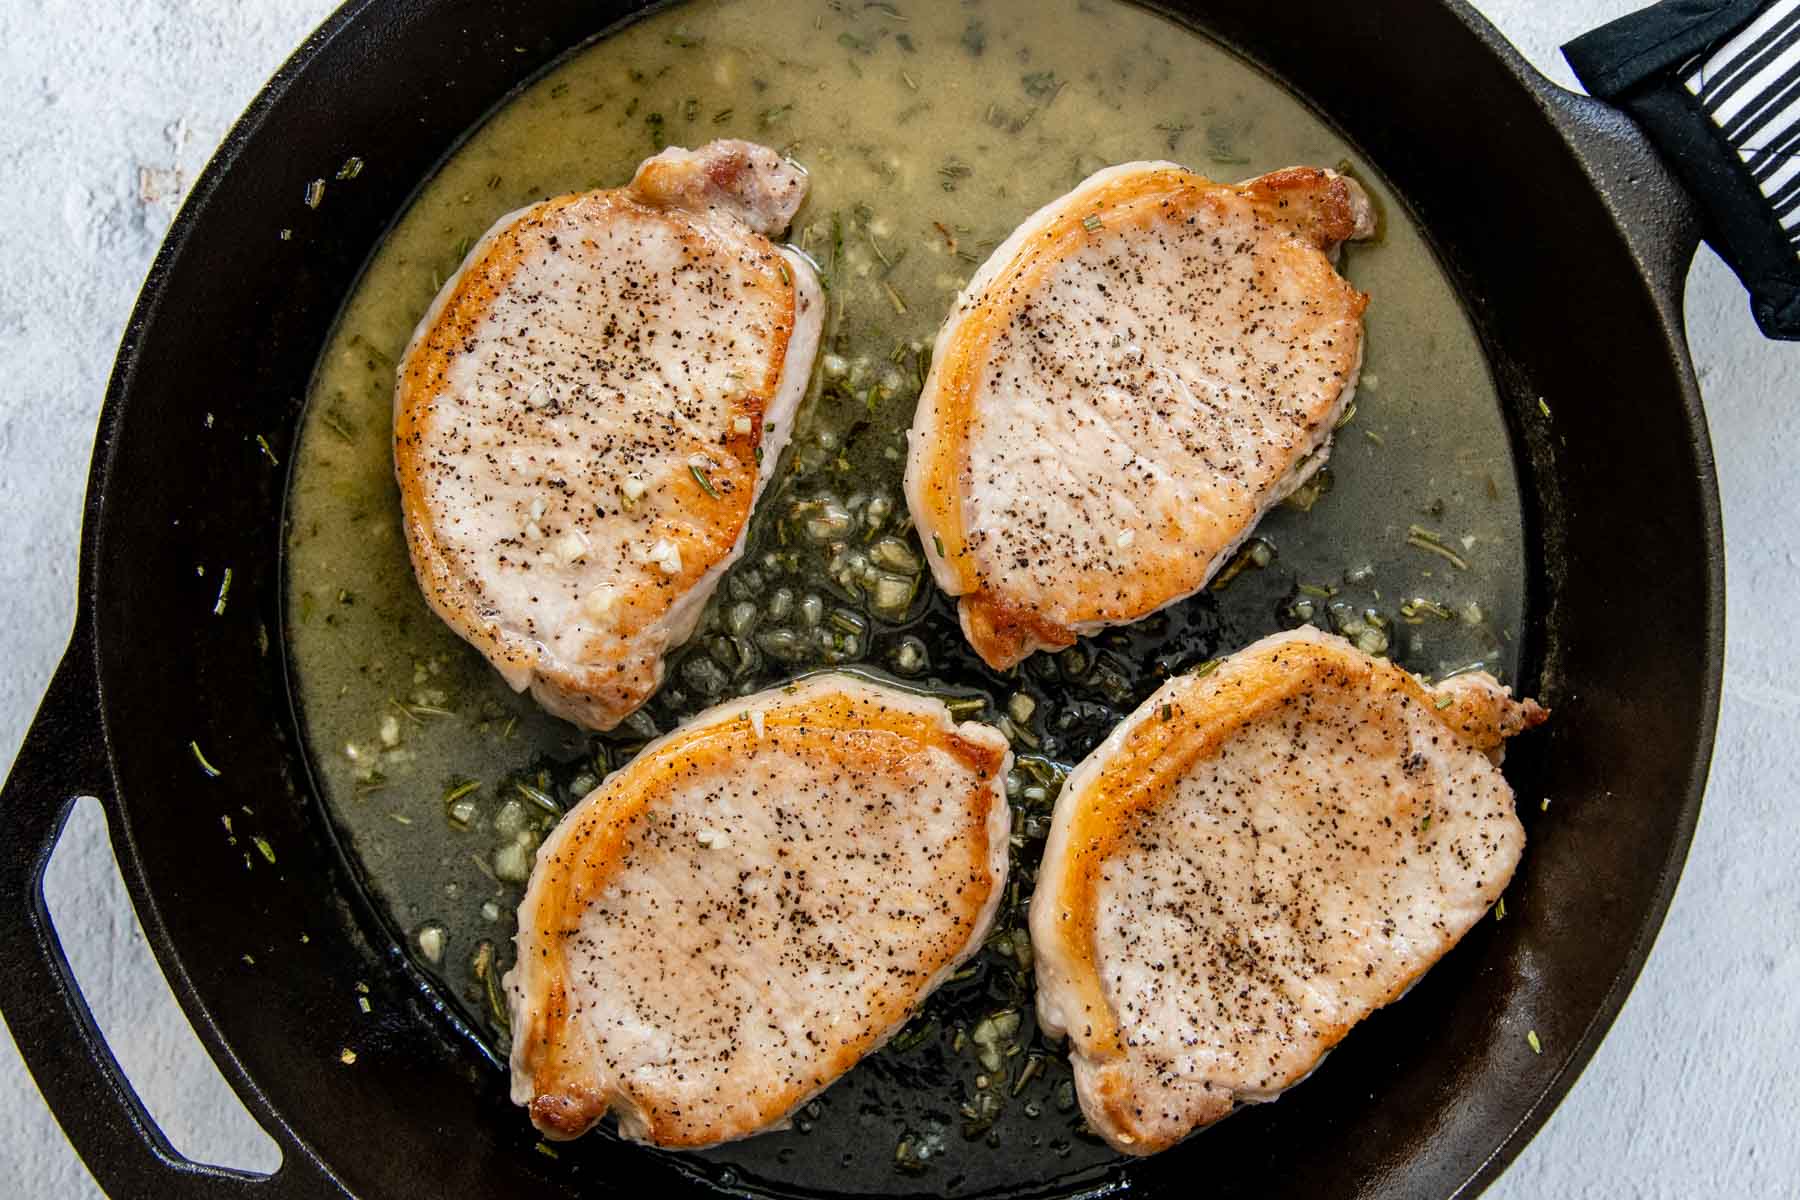 images showing how to cook rosemary pork chops.